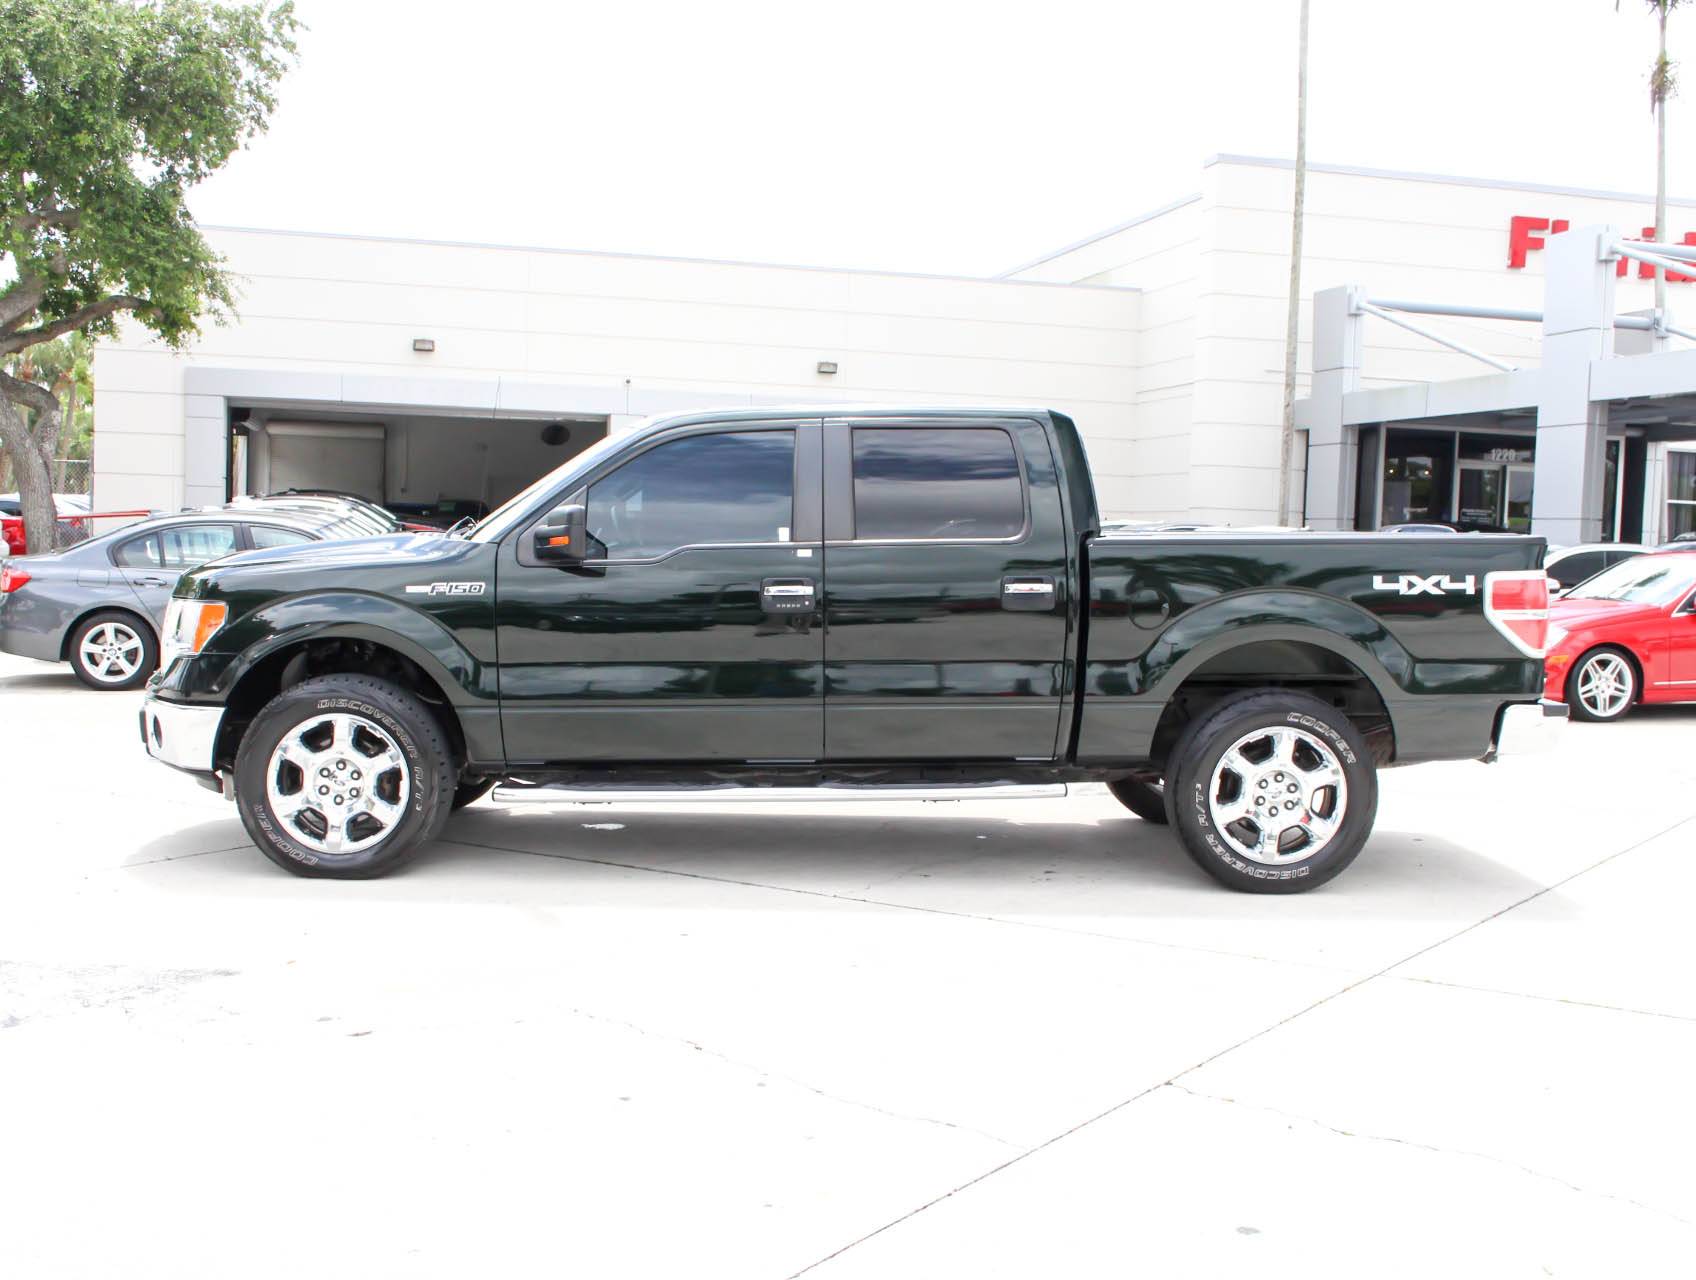 Florida Fine Cars - Used FORD F 150 2013 WEST PALM Xlt